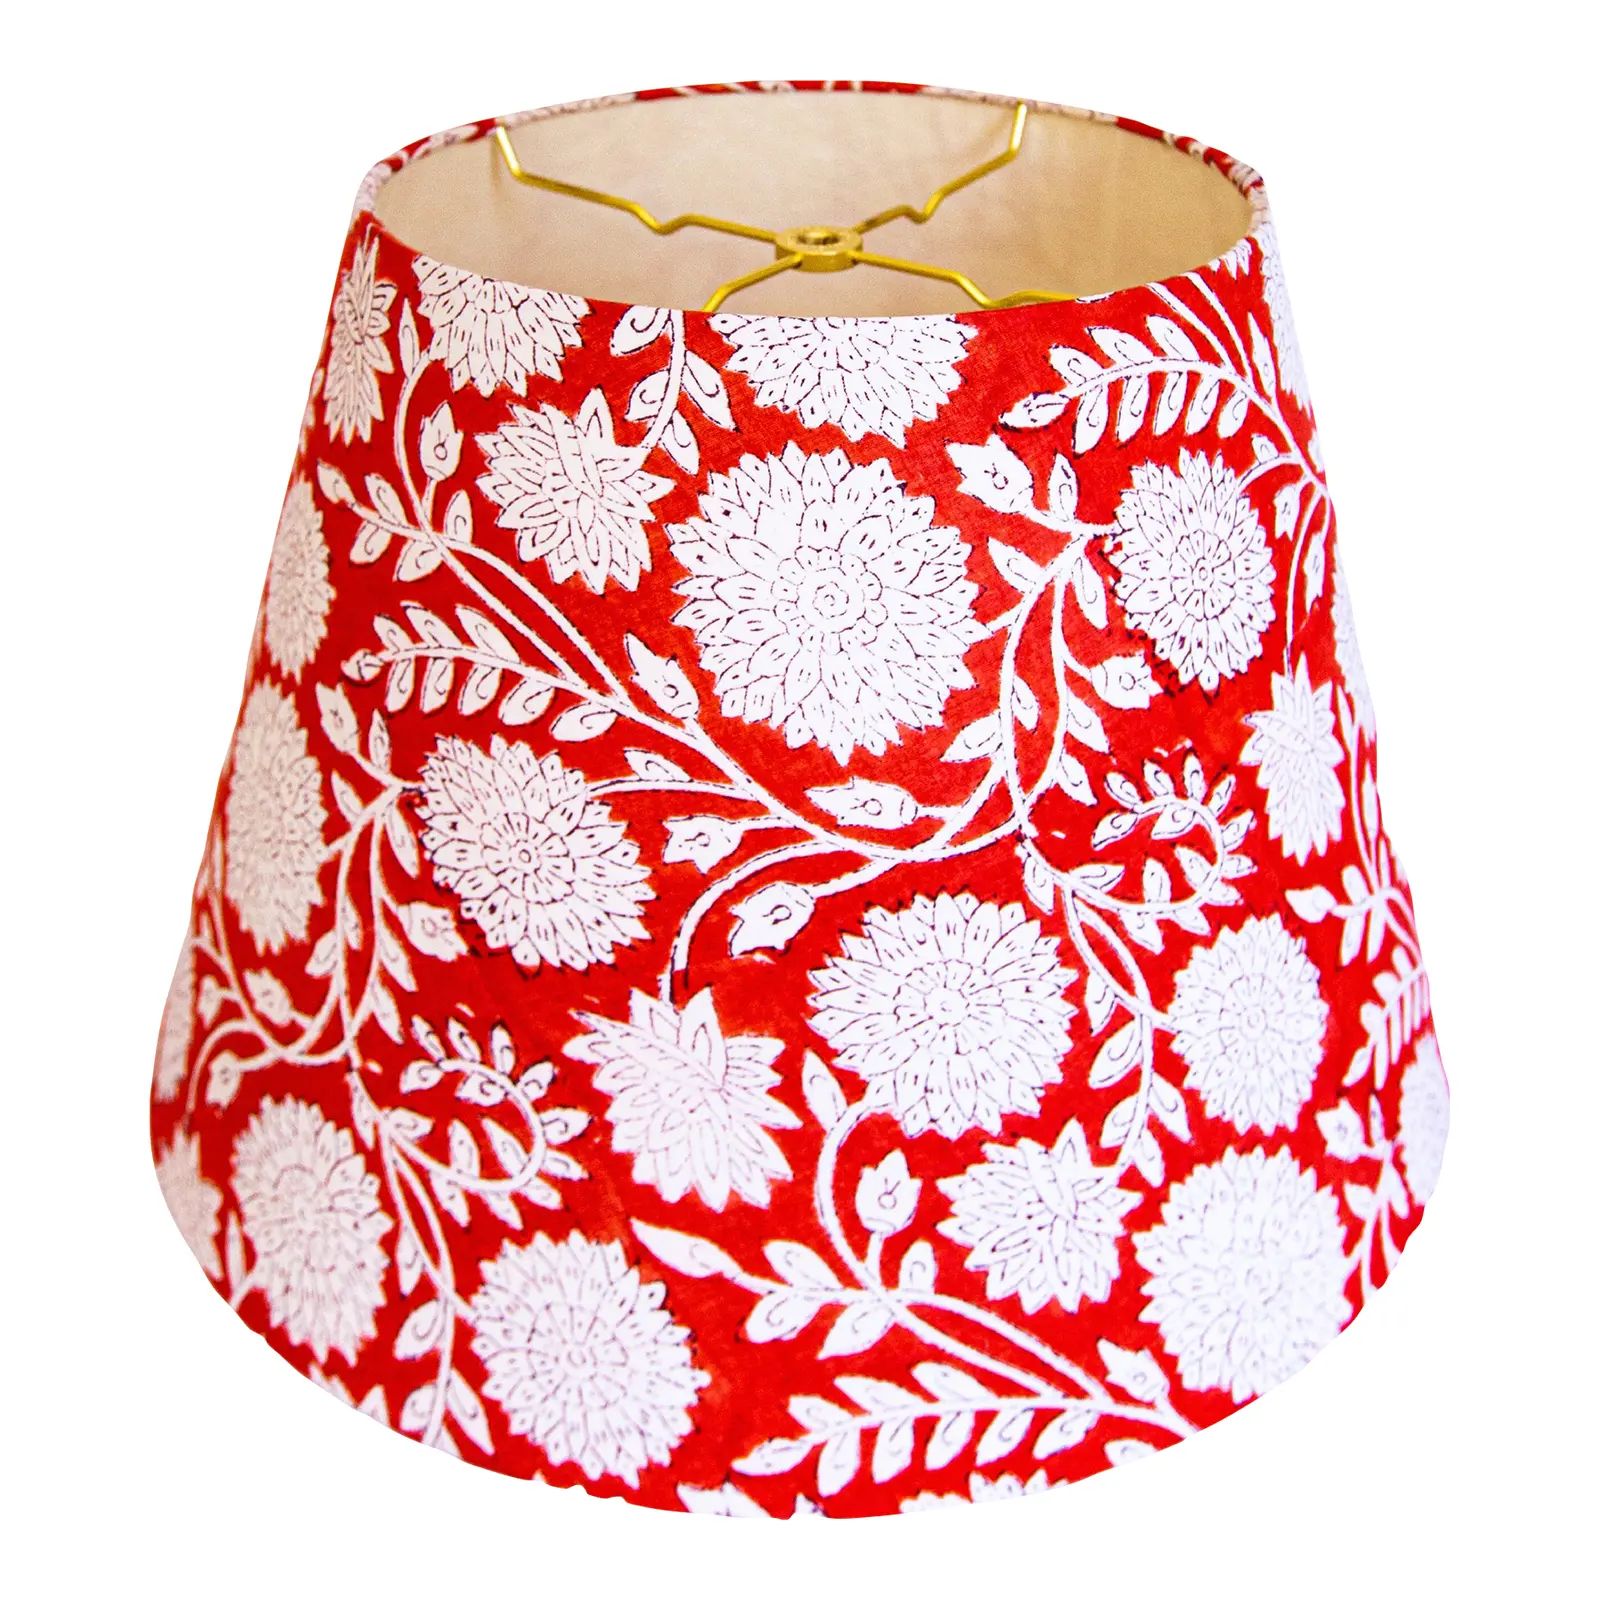 Angelica / Red and White Floral Block Print Empire Lamp Shade | Chairish